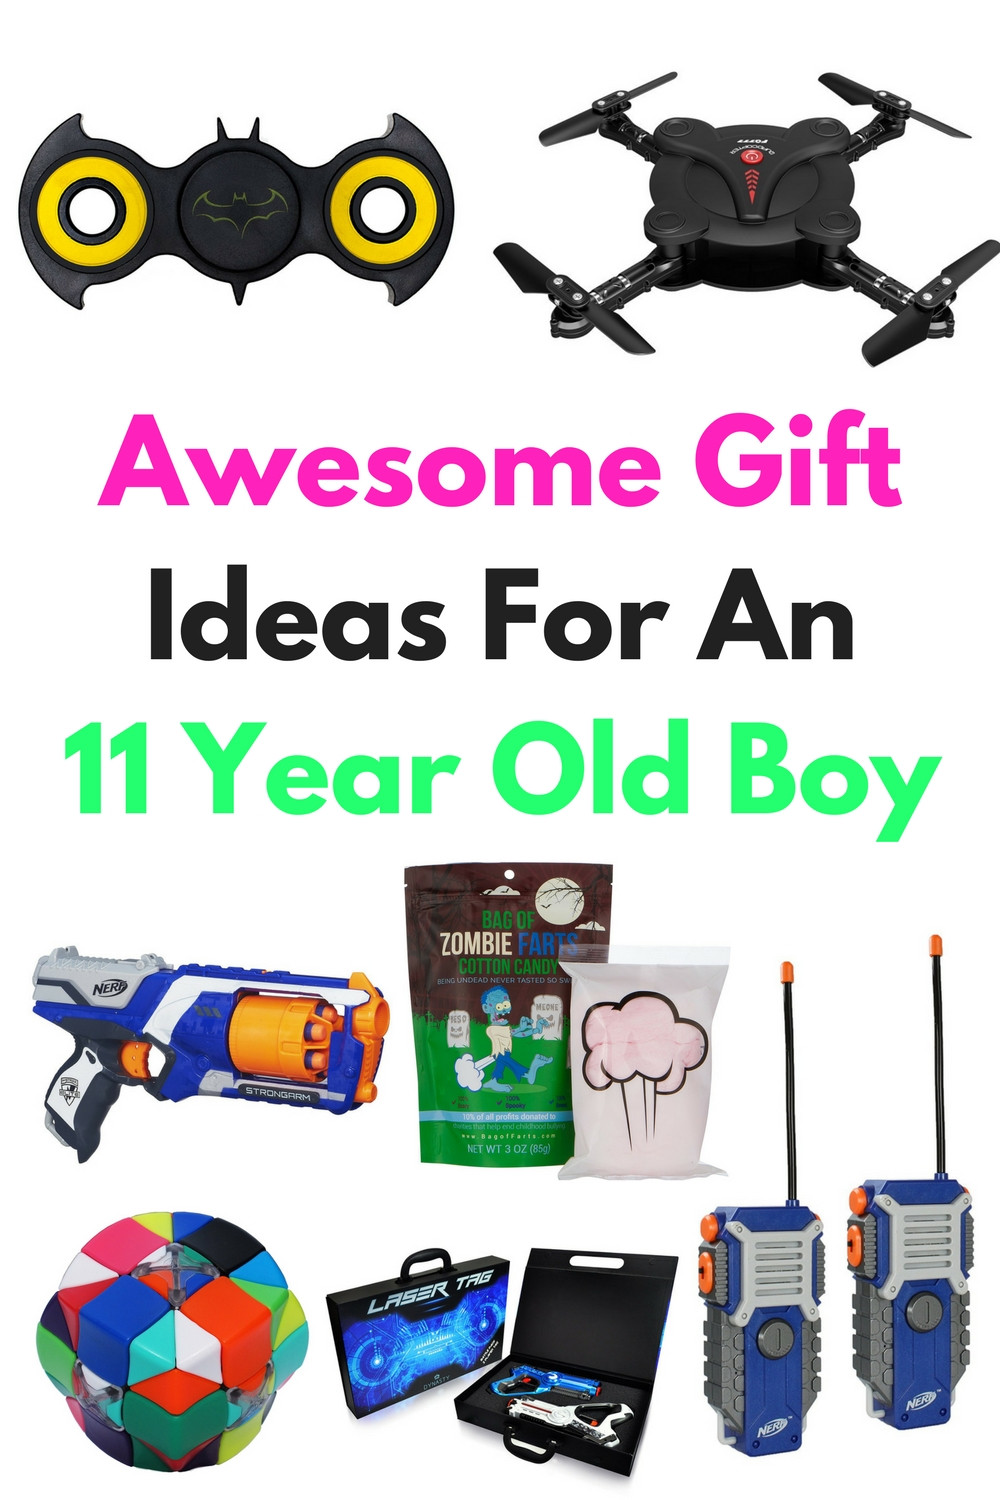 Birthday Gift For 11 Year Old Boy
 Awesome Gift Ideas For An 11 Year Old Boy